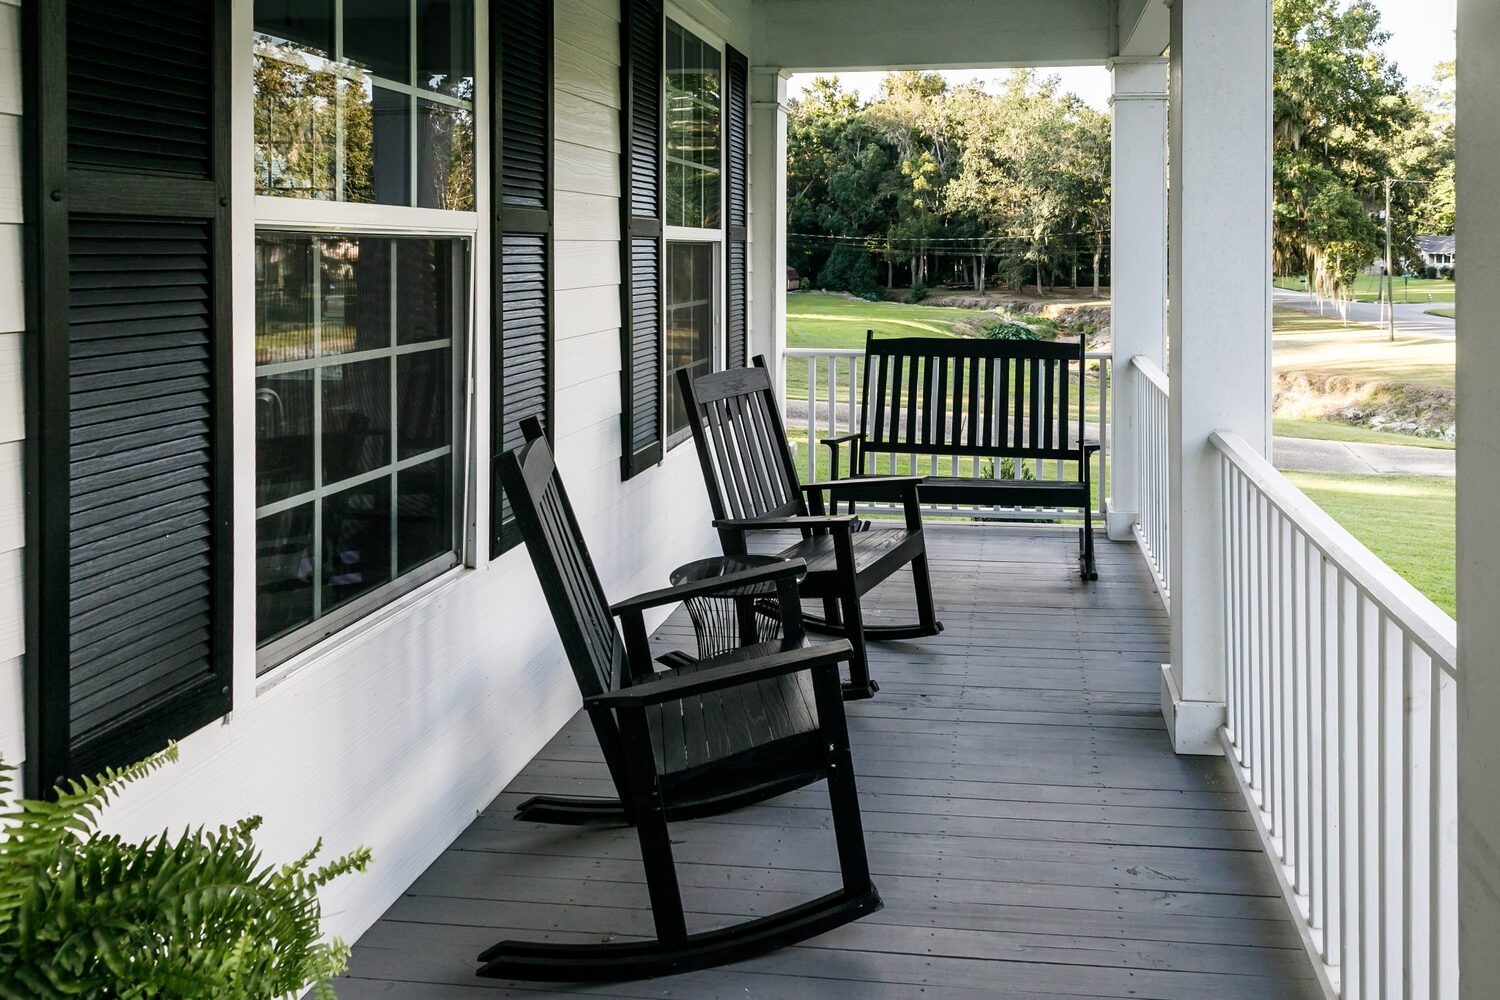 The white wooden porch crafted by professional porch builders Deerfield team